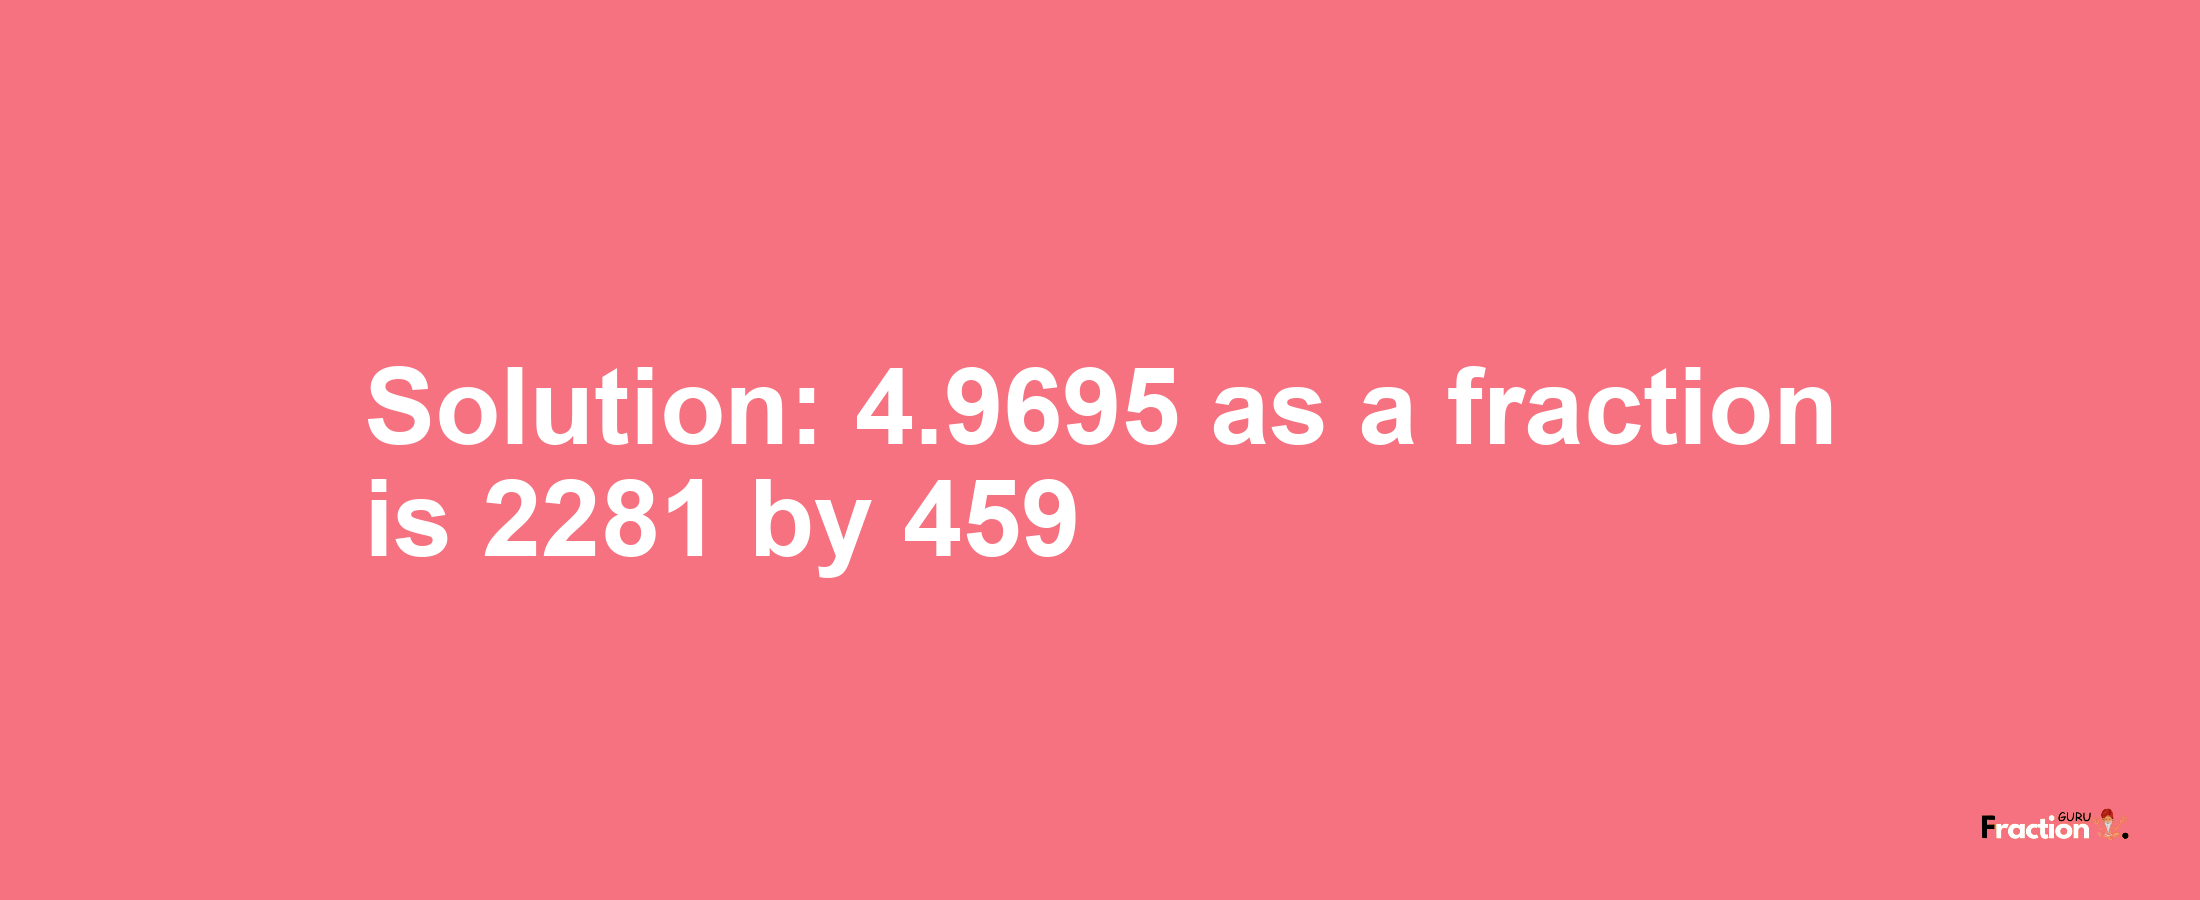 Solution:4.9695 as a fraction is 2281/459